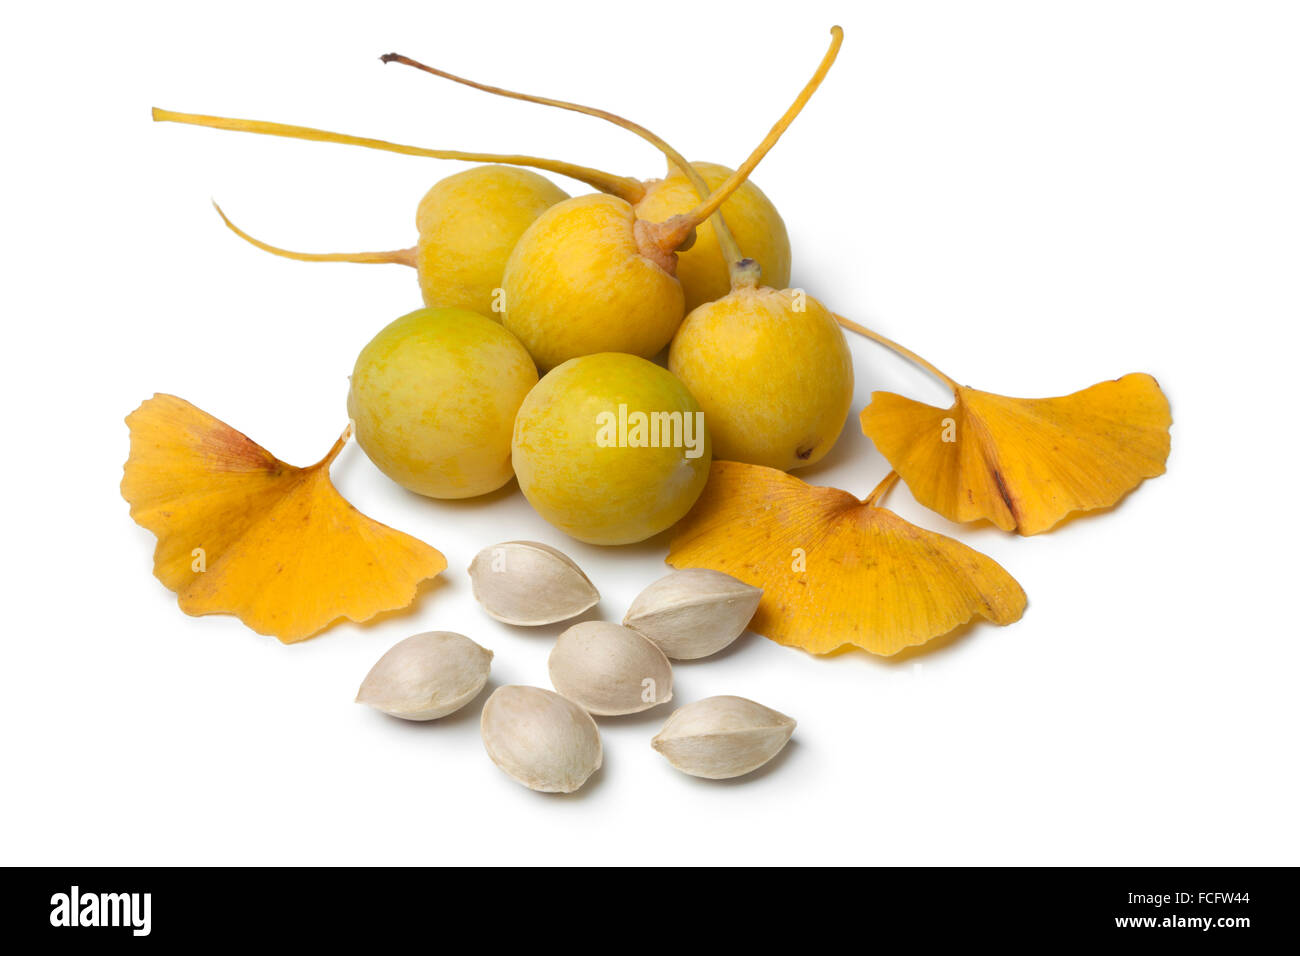 Ripe yellow Ginkgo biloba fruit, nuts and leaves on white background Stock Photo